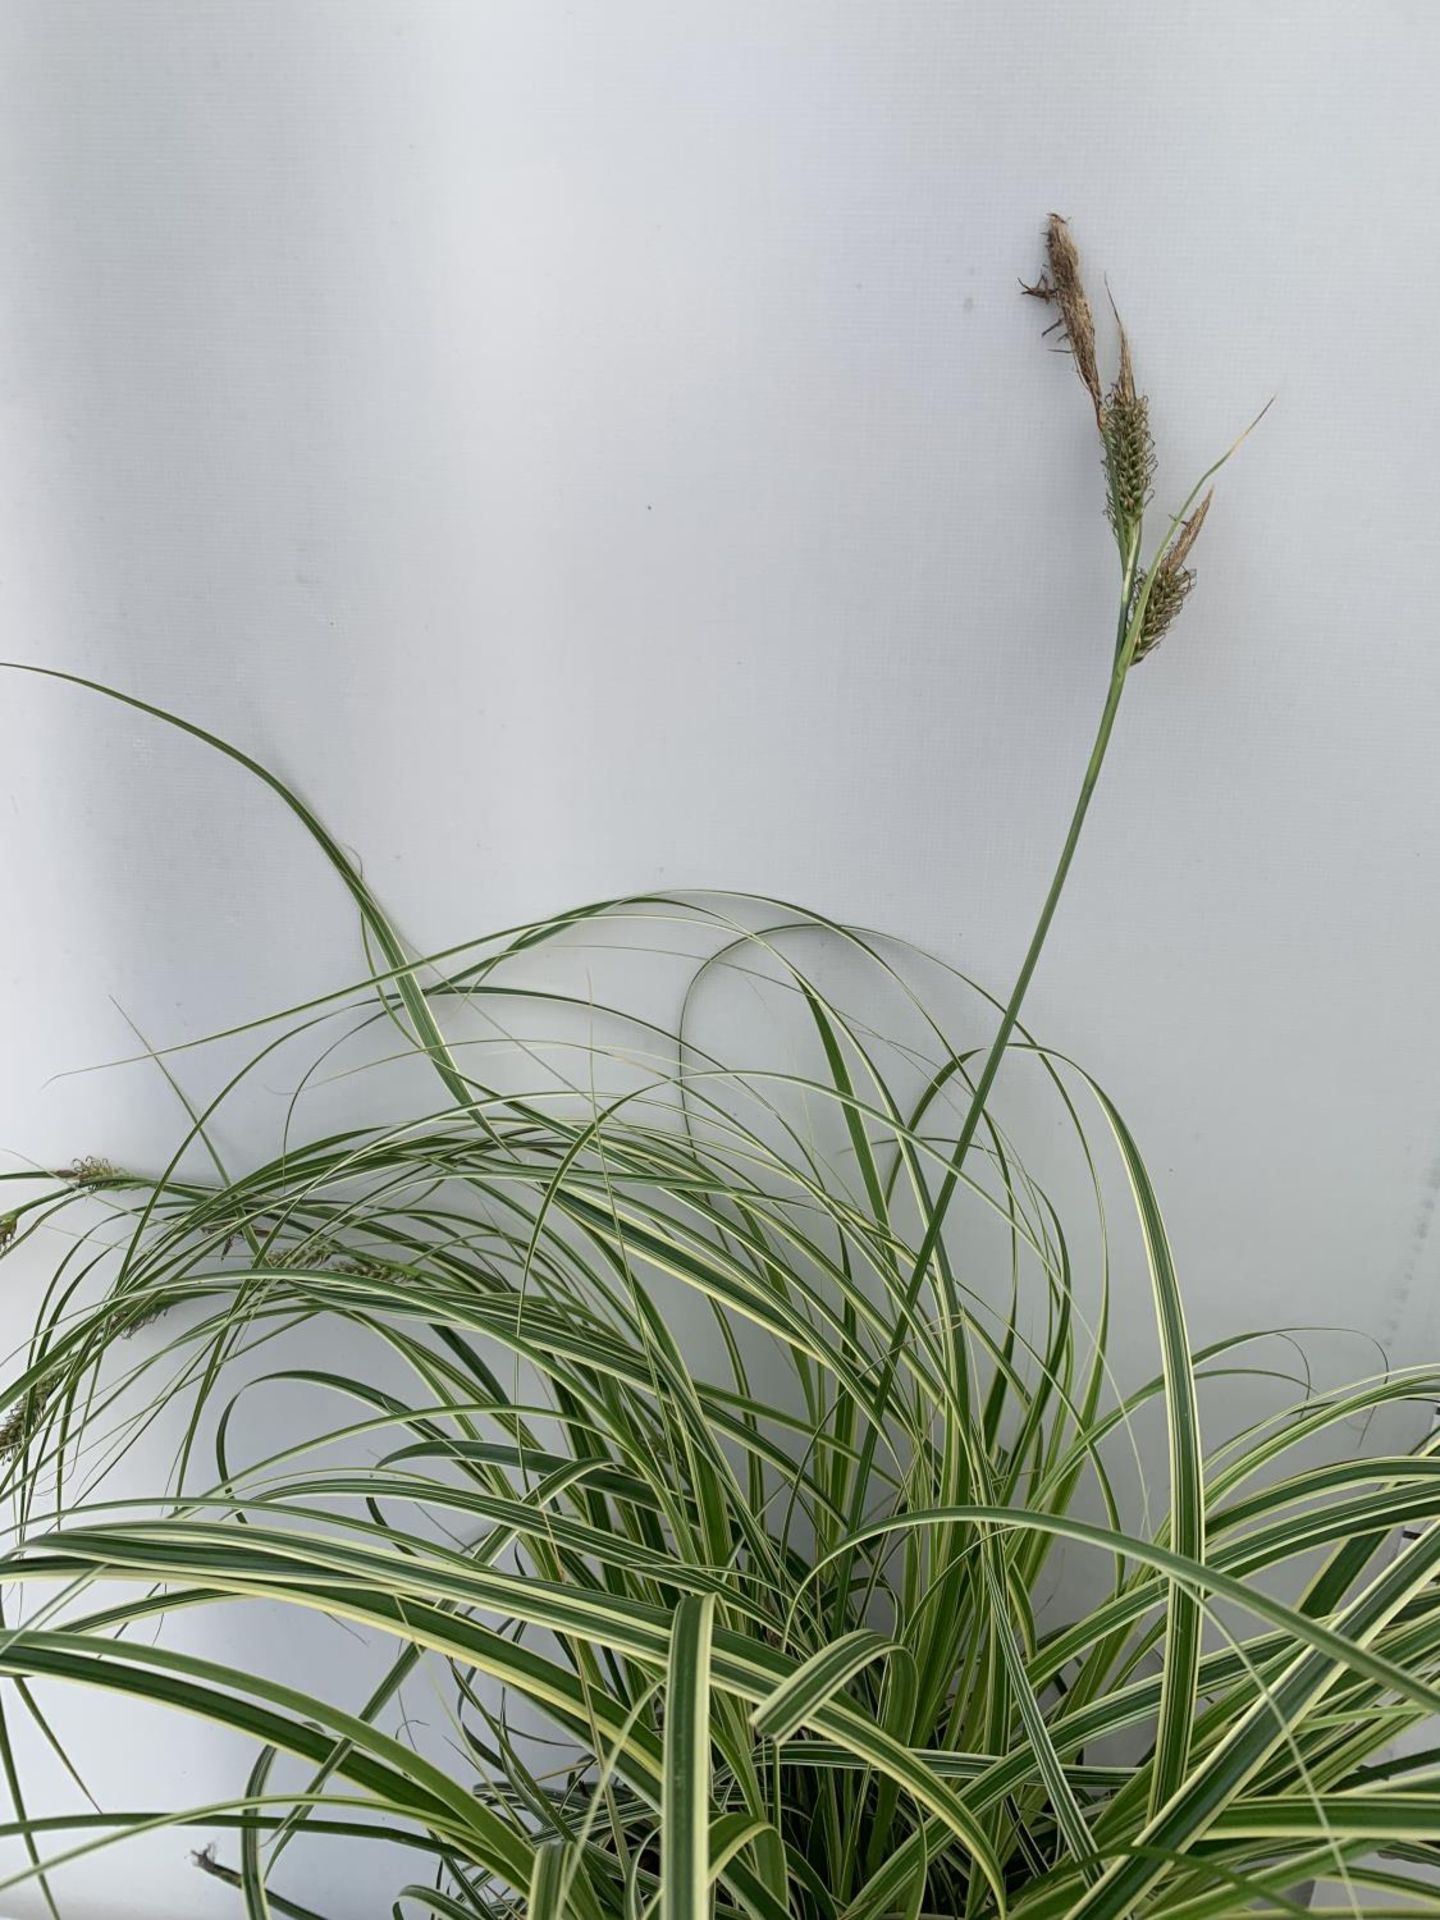 TWO HARDY ORNAMENTAL GRASSES CAREX 'FEATHER FALLS' AND MORROWII 'IRISH GREEN' IN 3 LTR POTS APPROX - Image 3 of 6